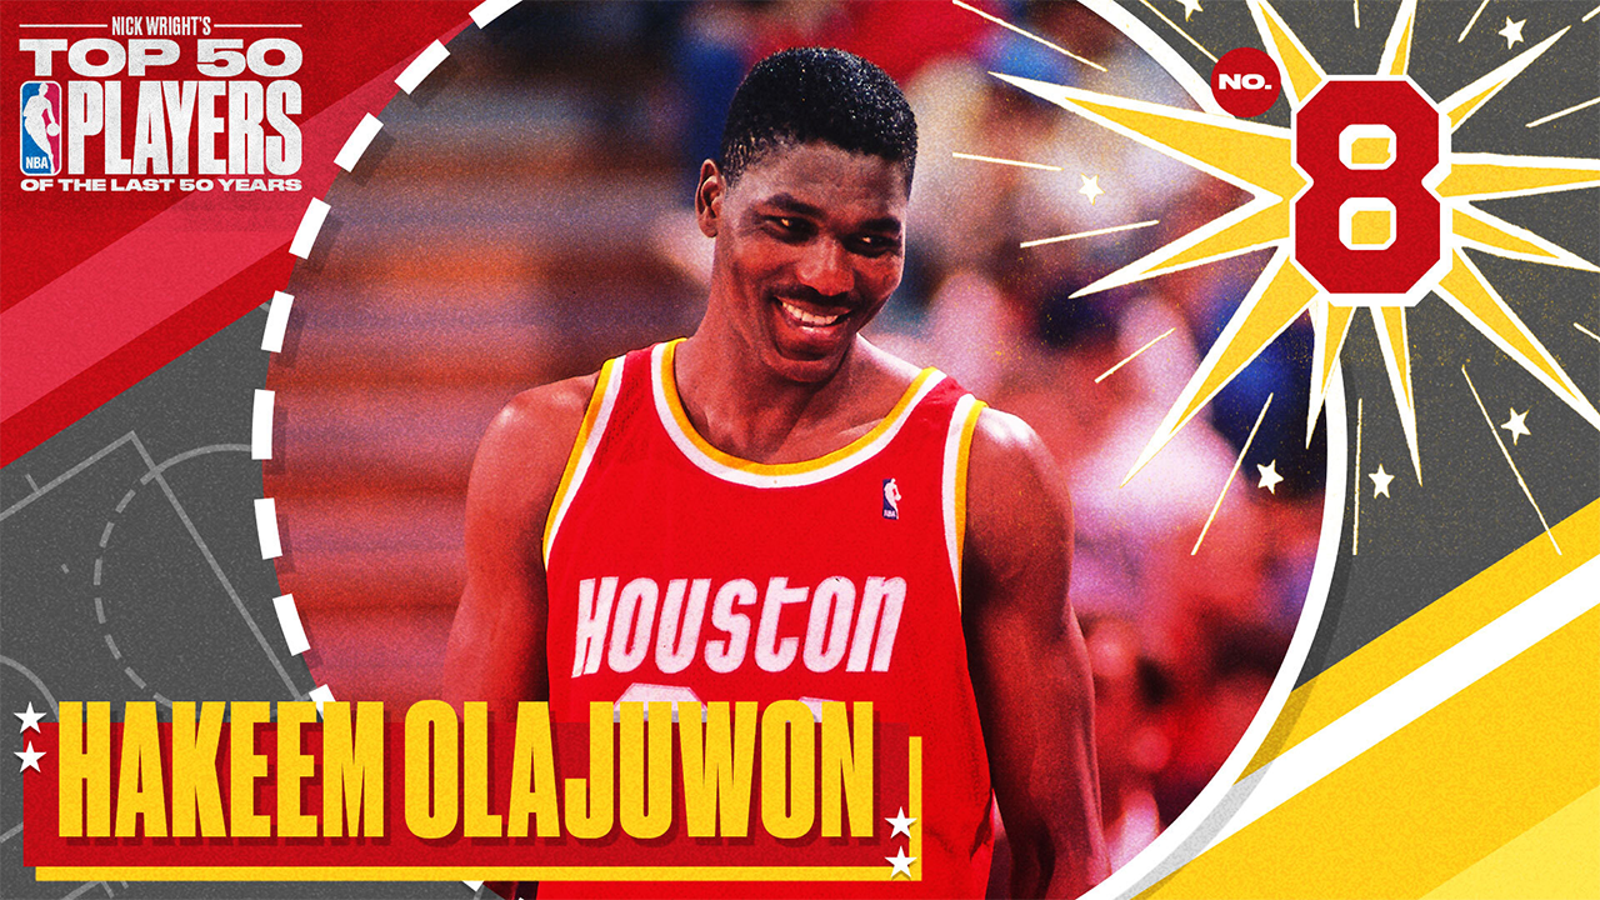 Hakeem Olajuwon is No. 8 on Nick Wright's Top 50 NBA Players of the Last 50 Years